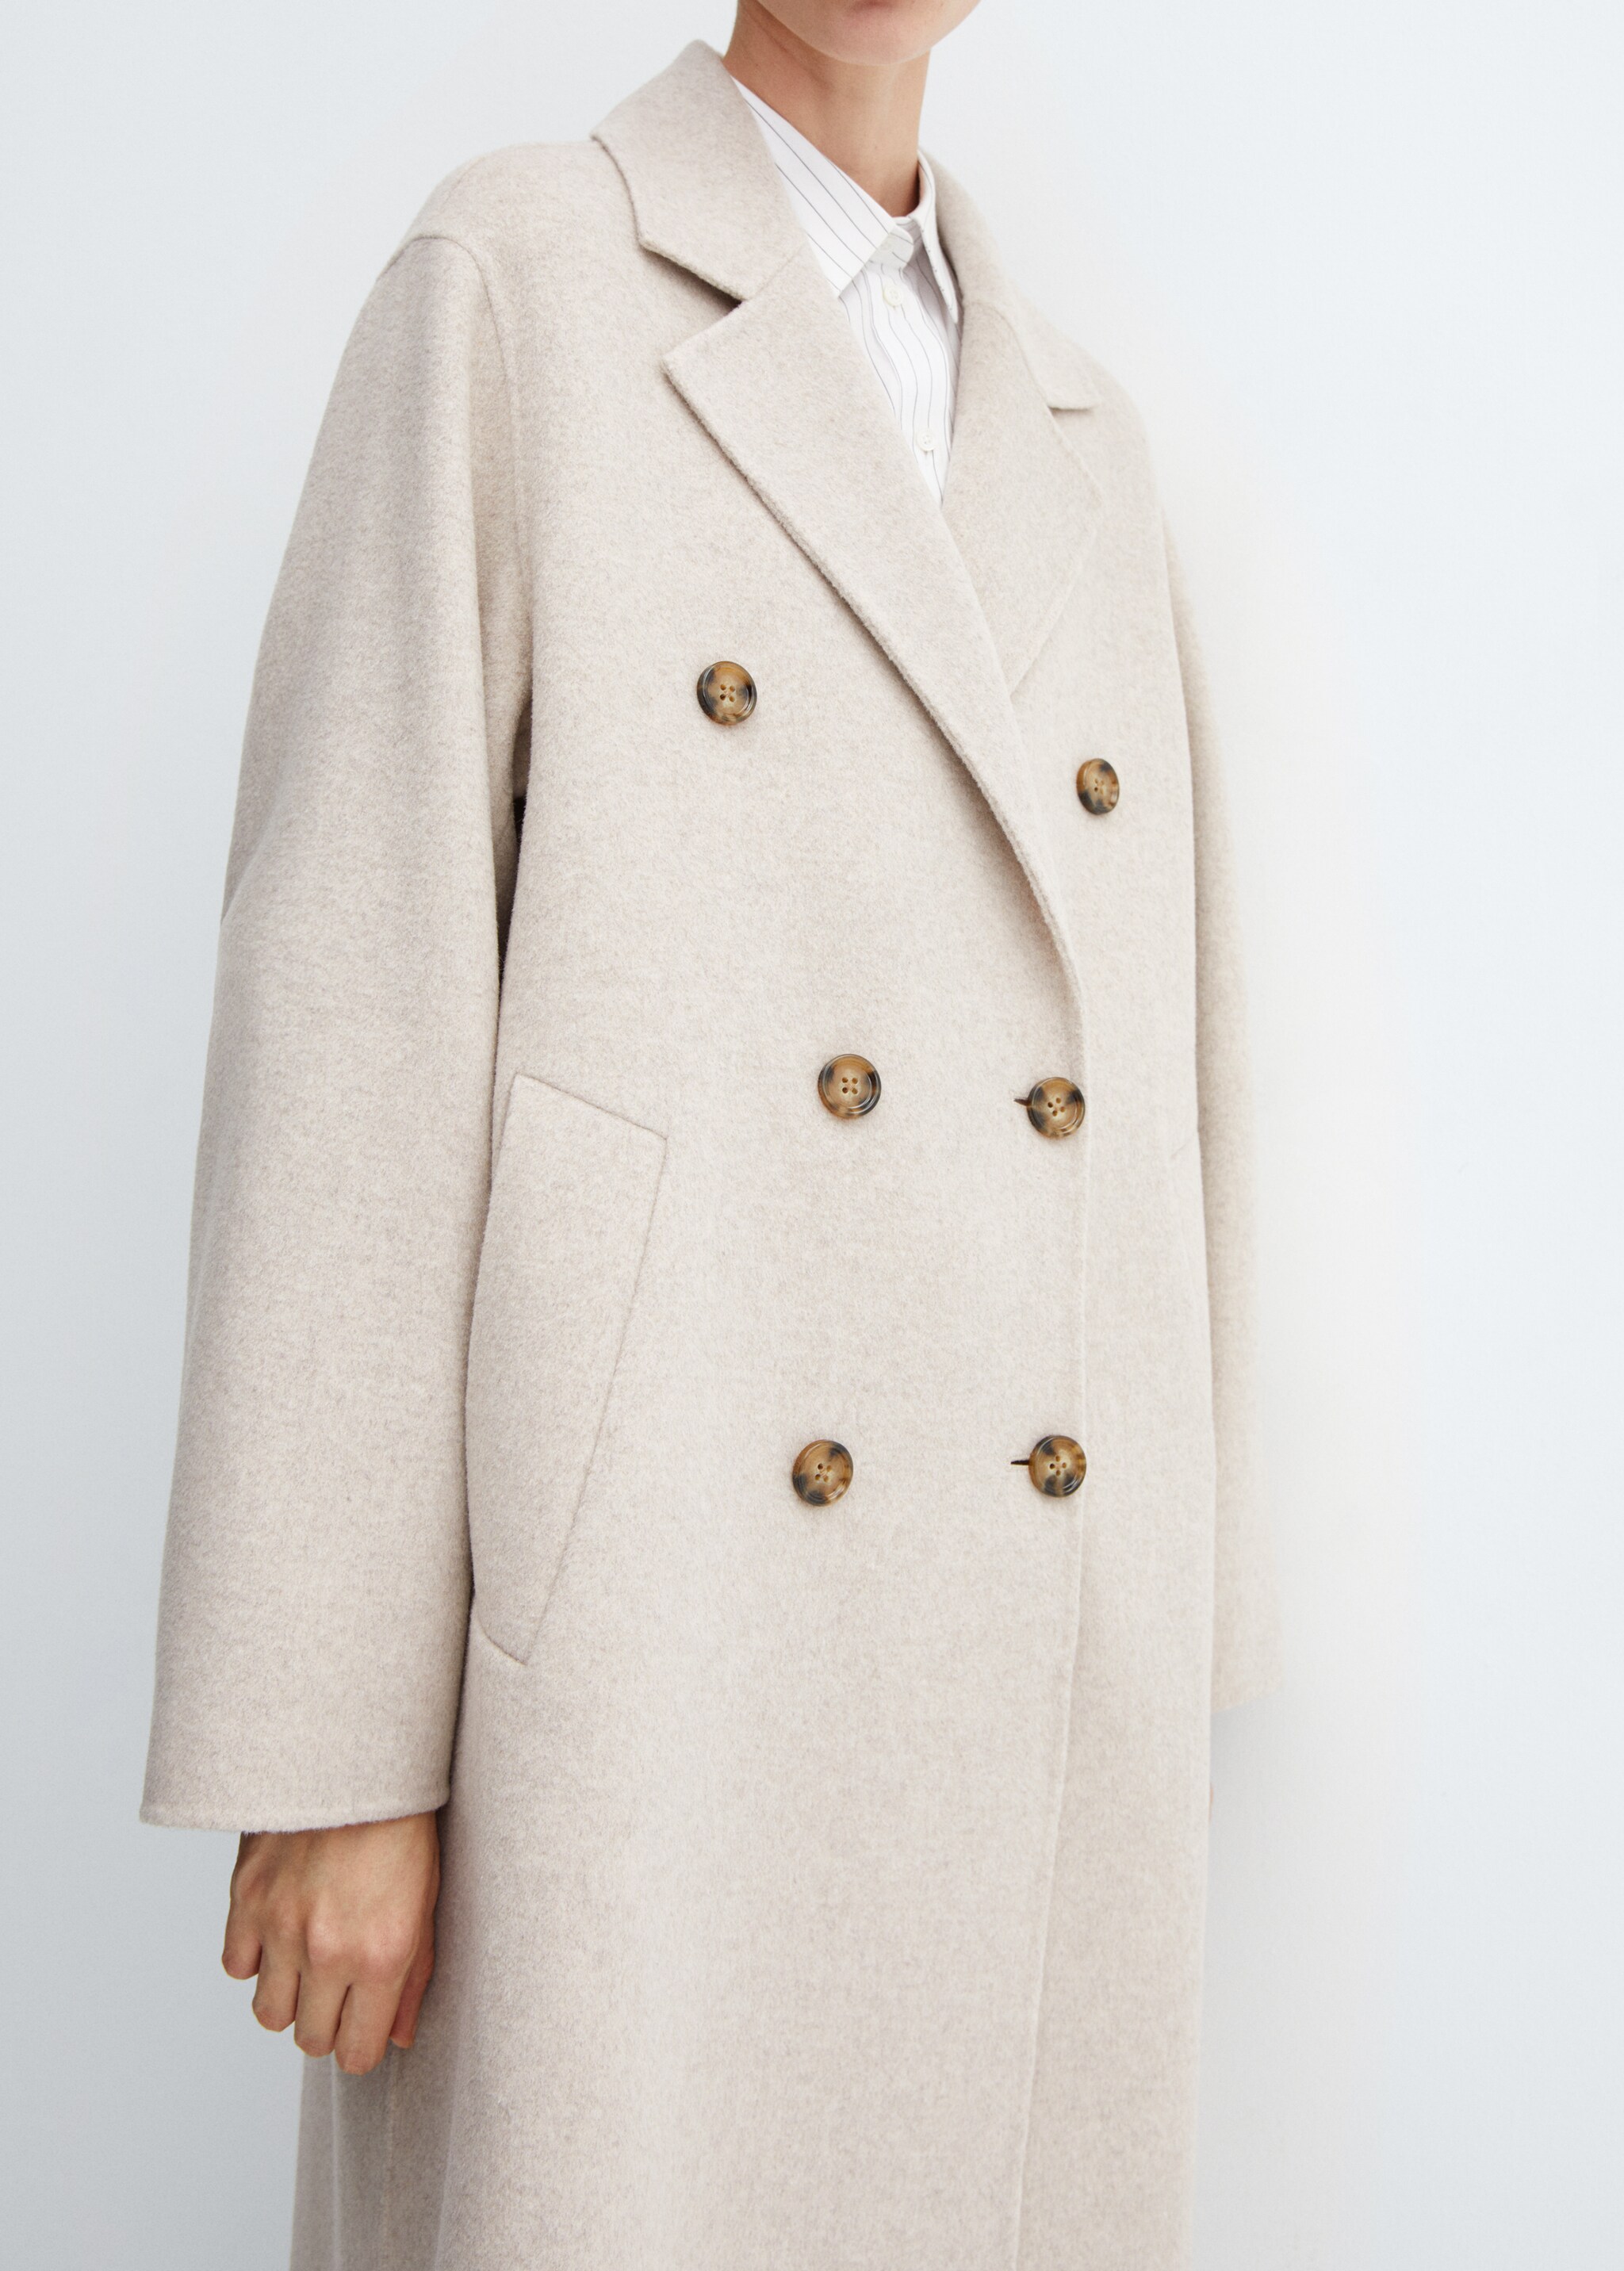 Handmade oversized wool coat - Details of the article 6